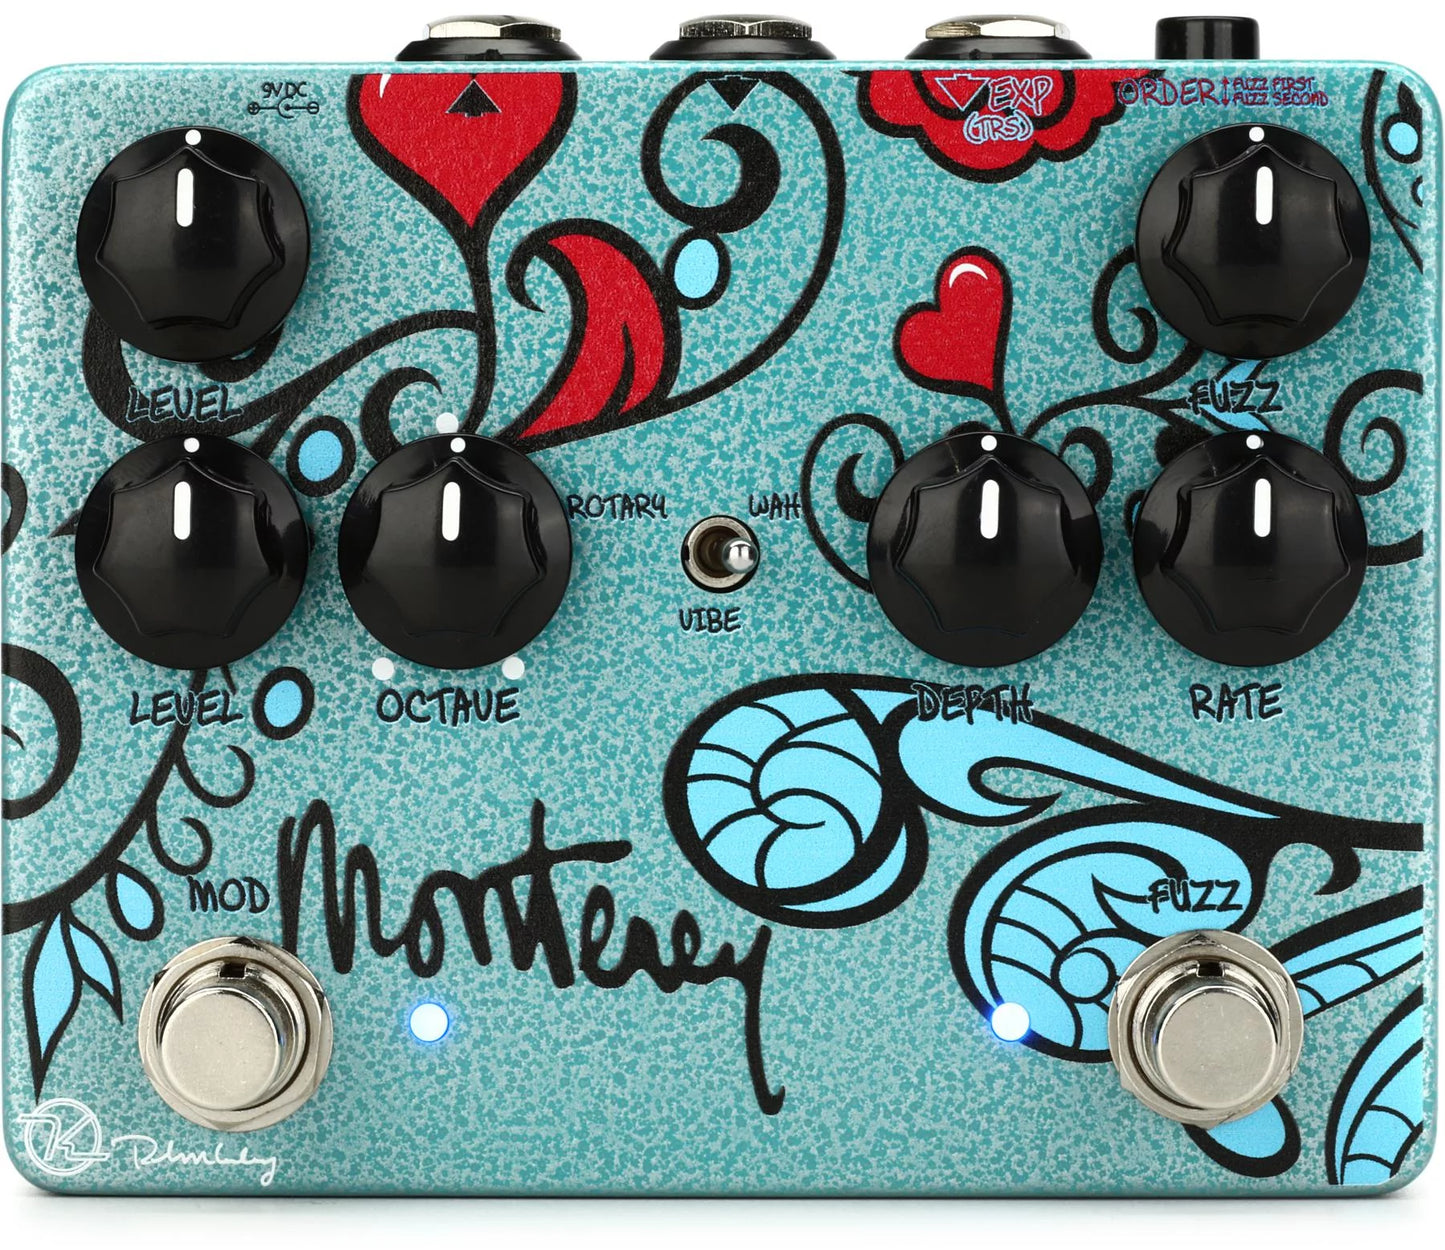 Keeley Monterey Rotary Fuzz Vibe Multi-effects Pedal